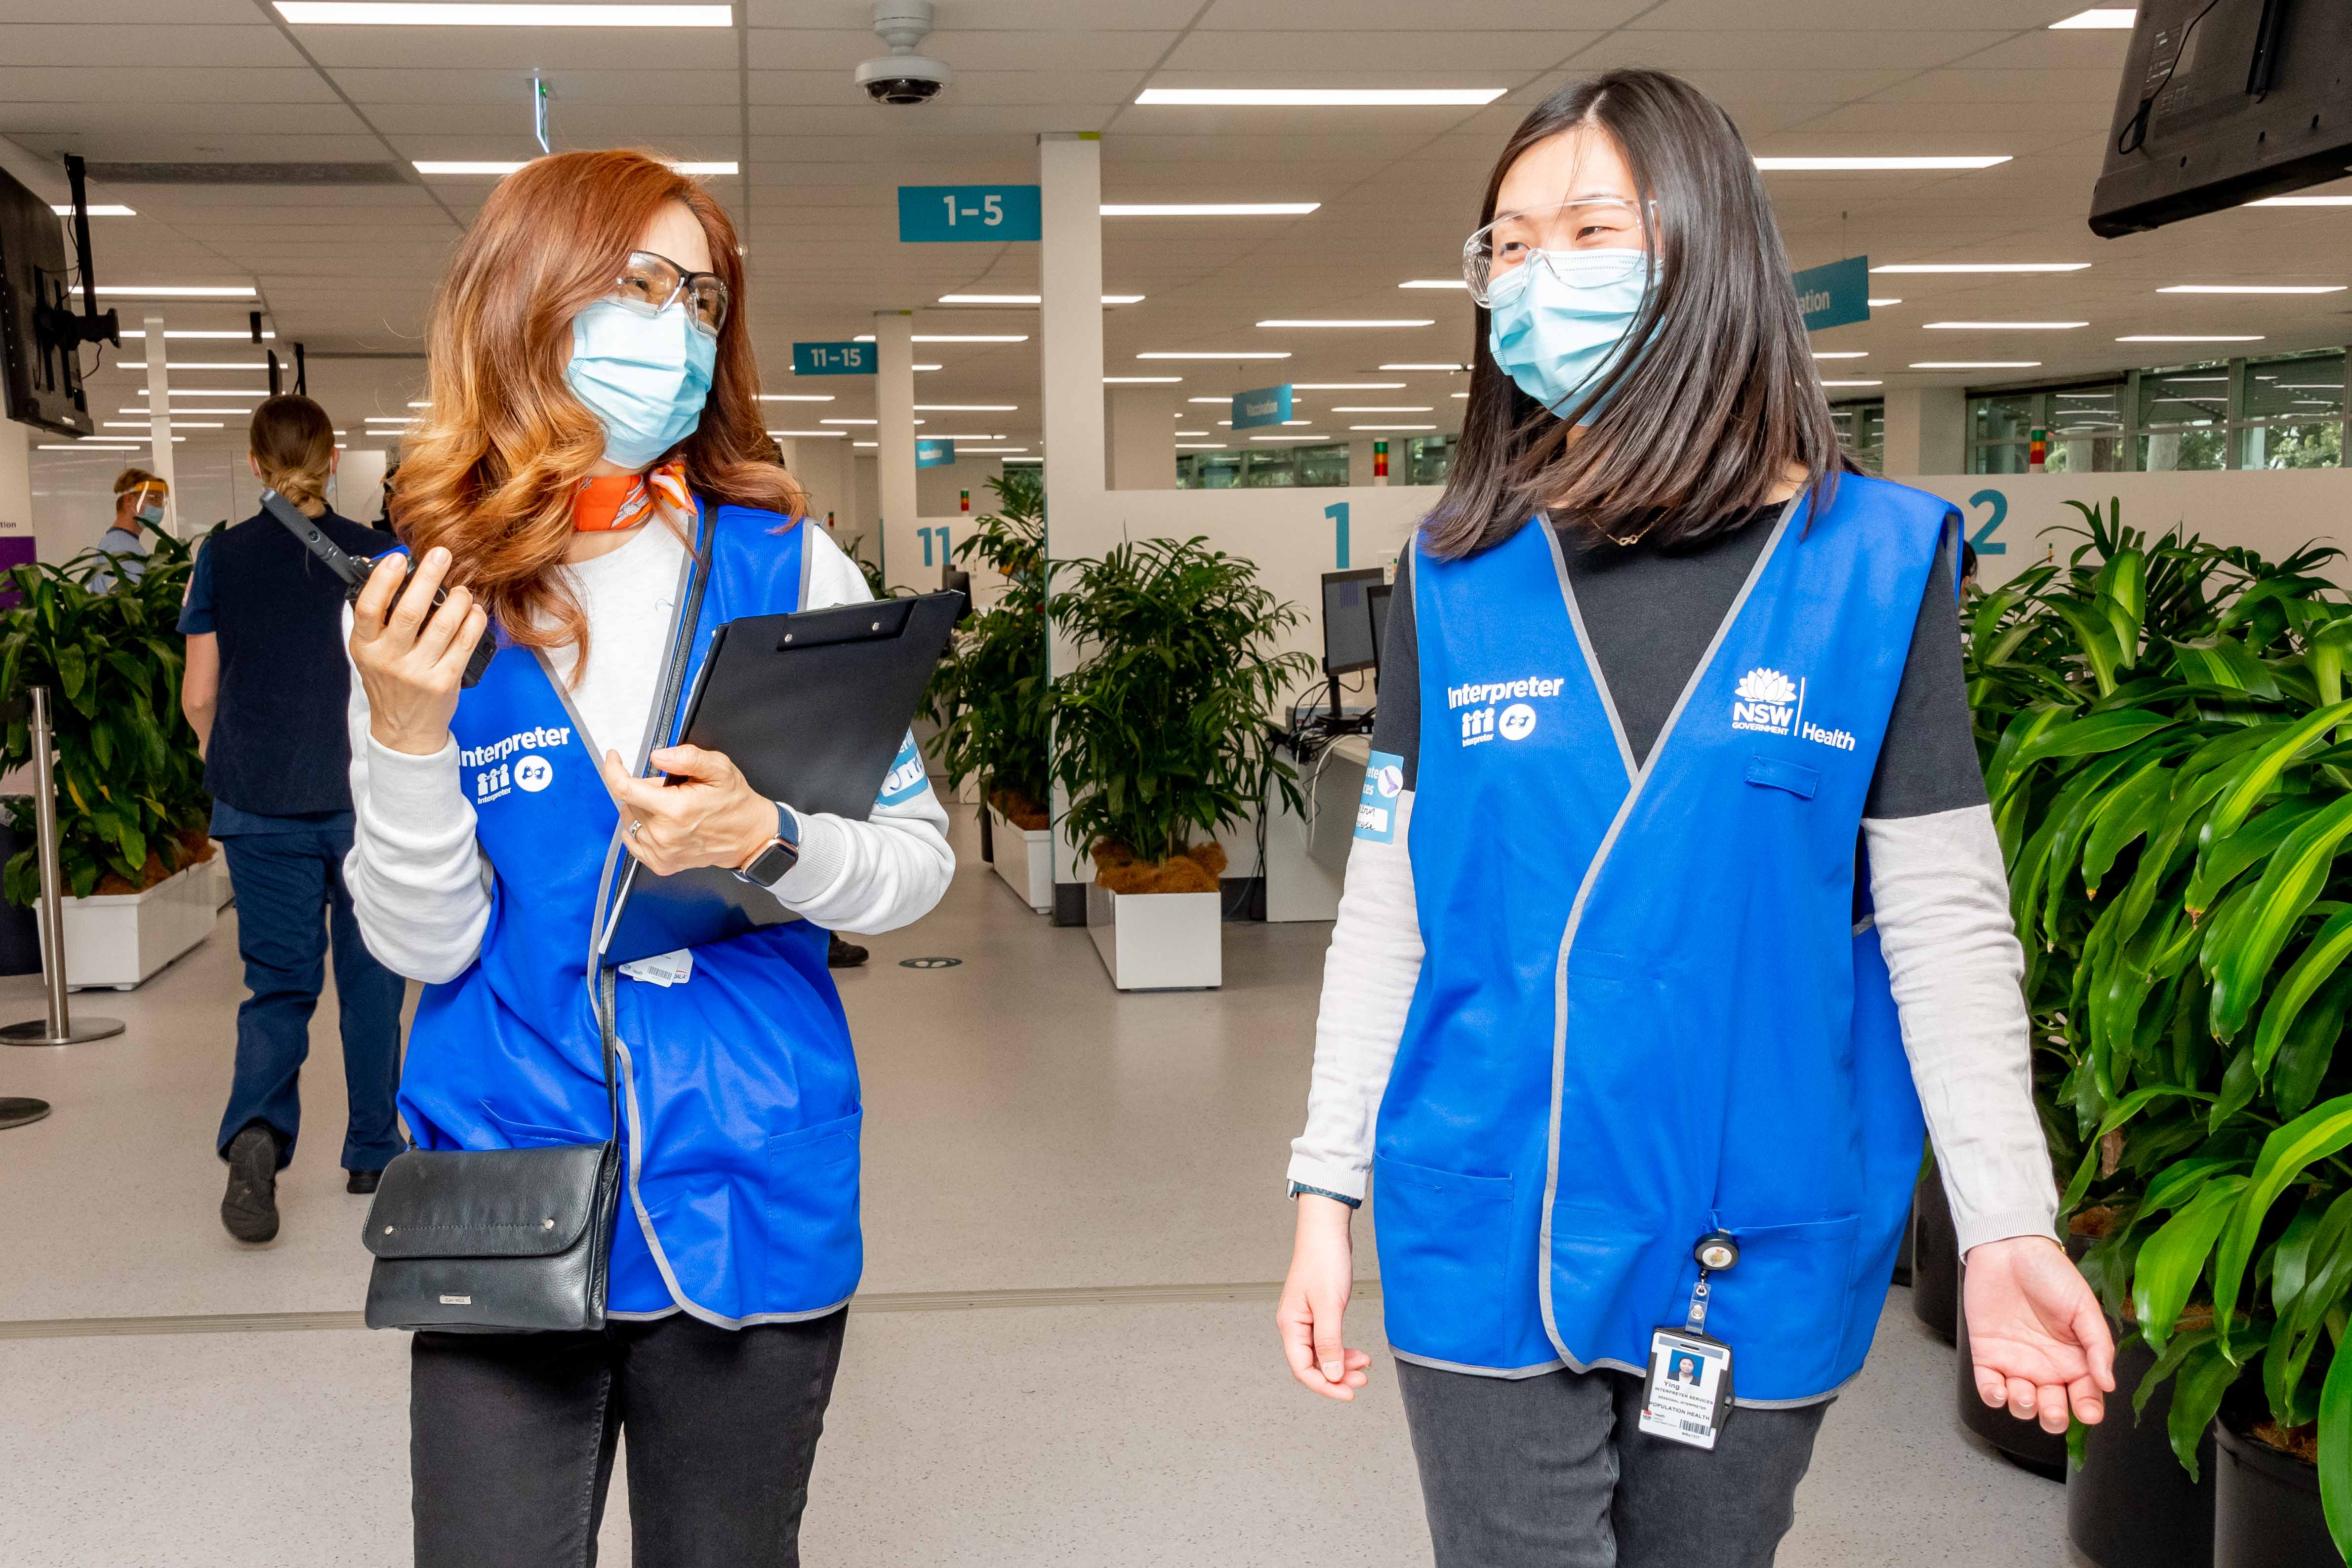 Two female vaccine centre workers walking together wearing blue vests